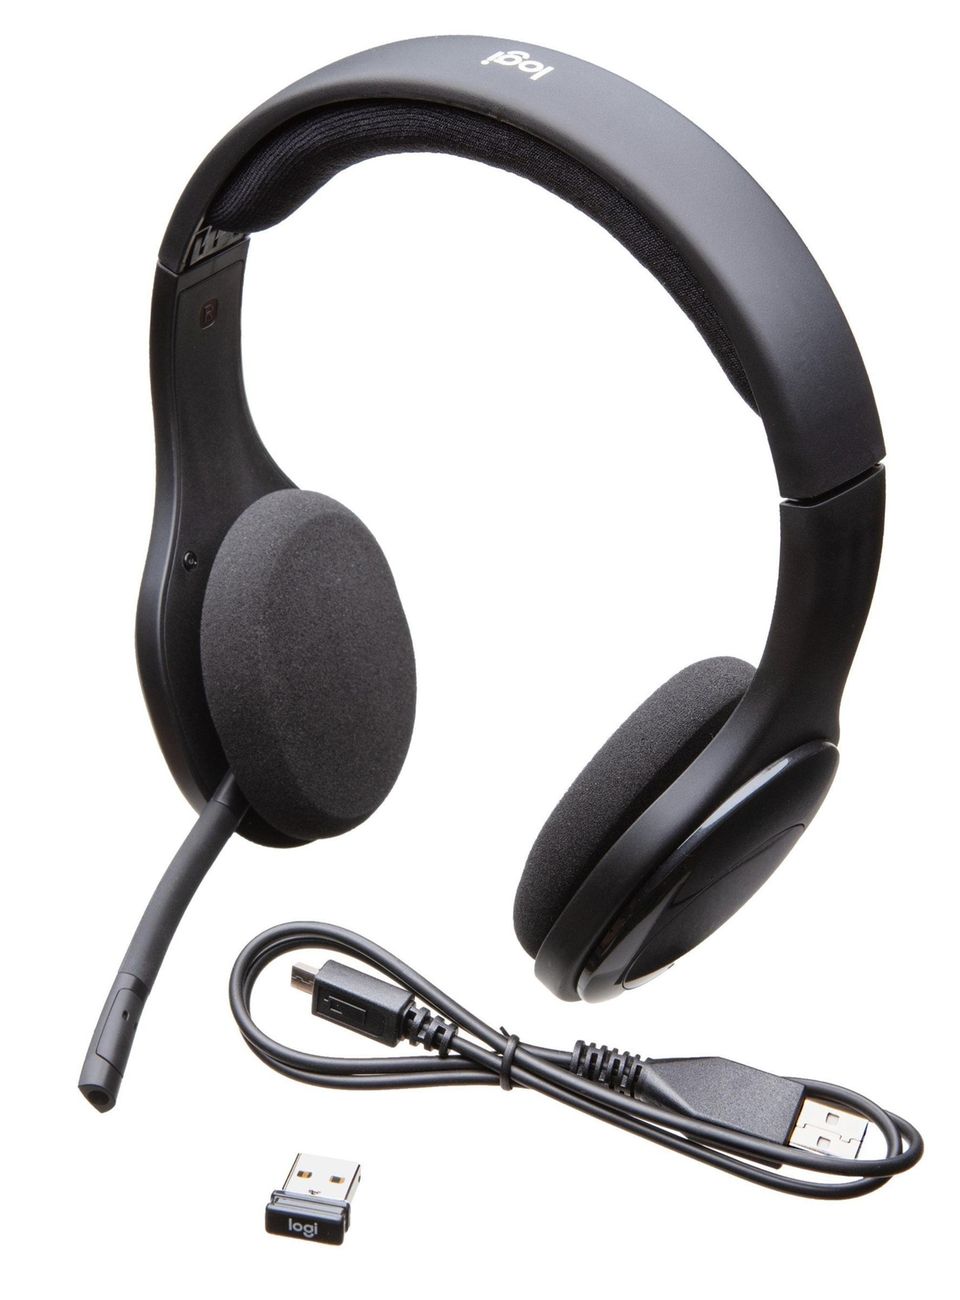 This wireless bluetooth headset is compatible with computers,